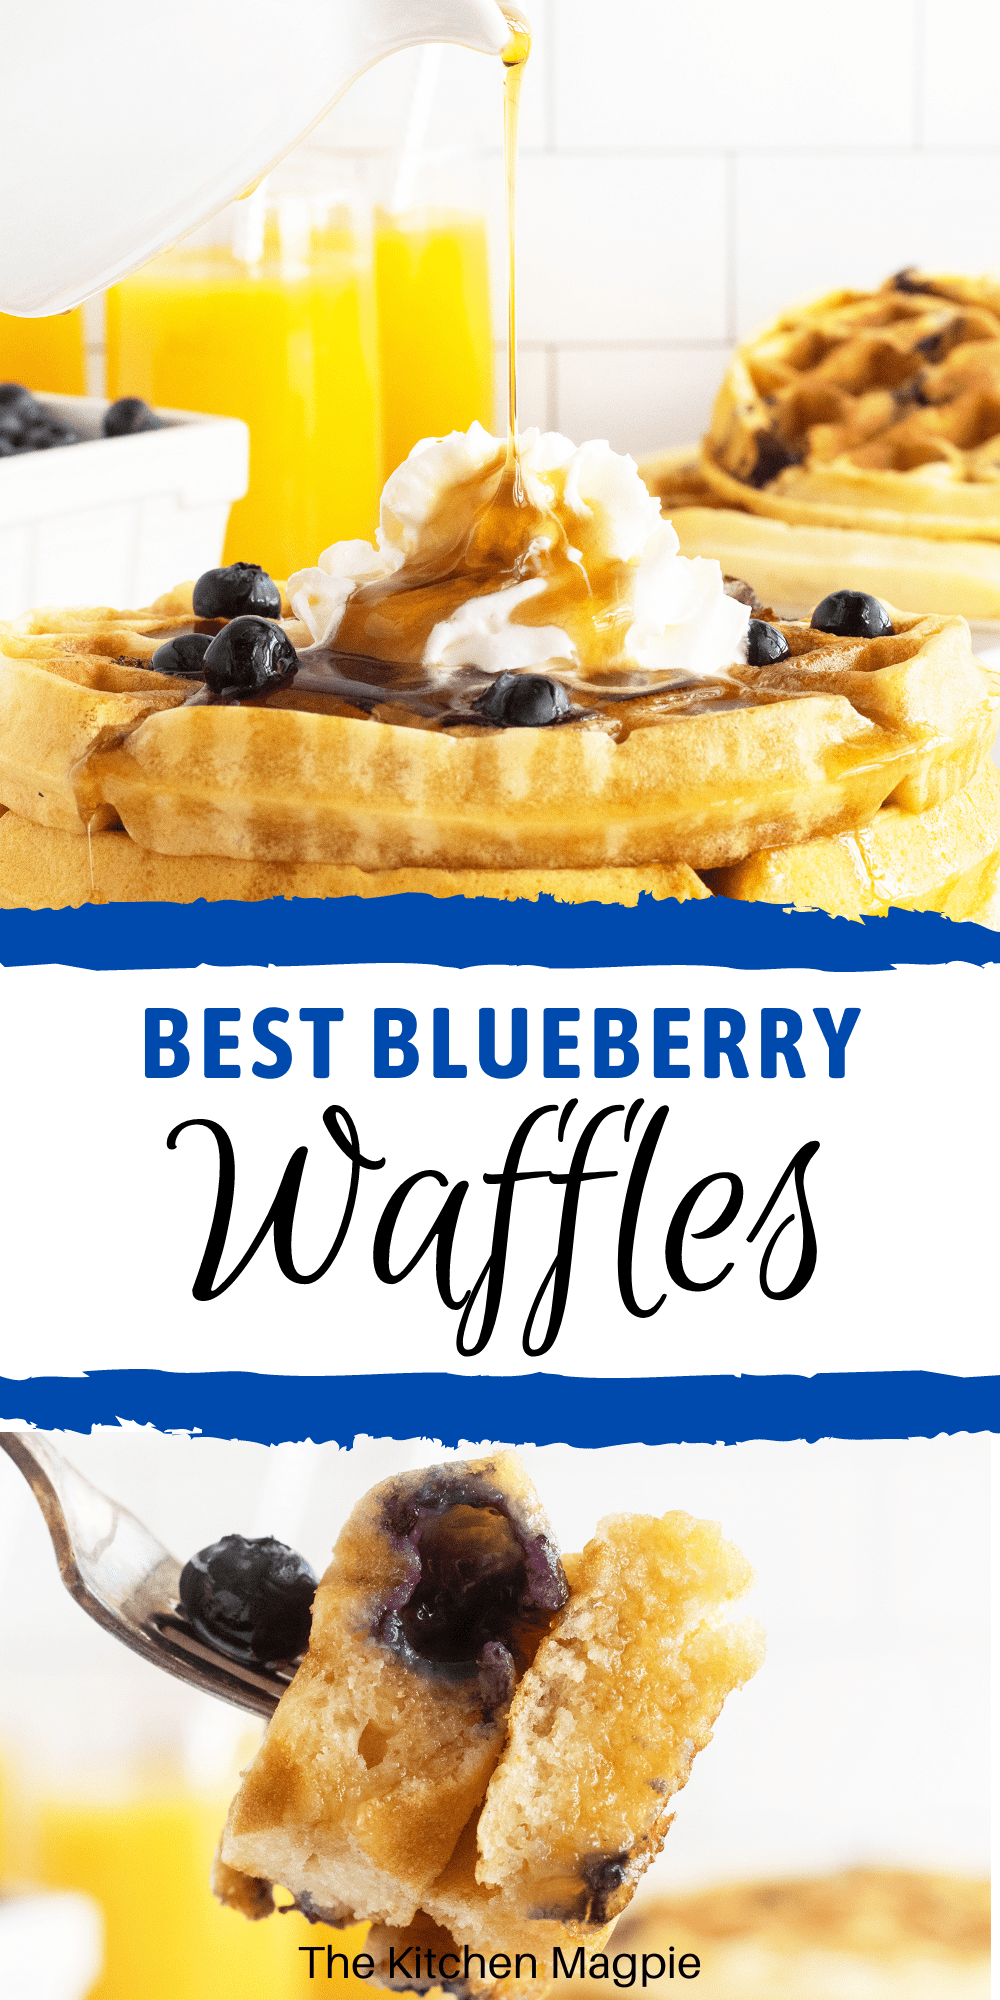 Crispy, a little bit chewy, and, in this recipe the waffles are packed full of juicy blueberries; what's not to like?